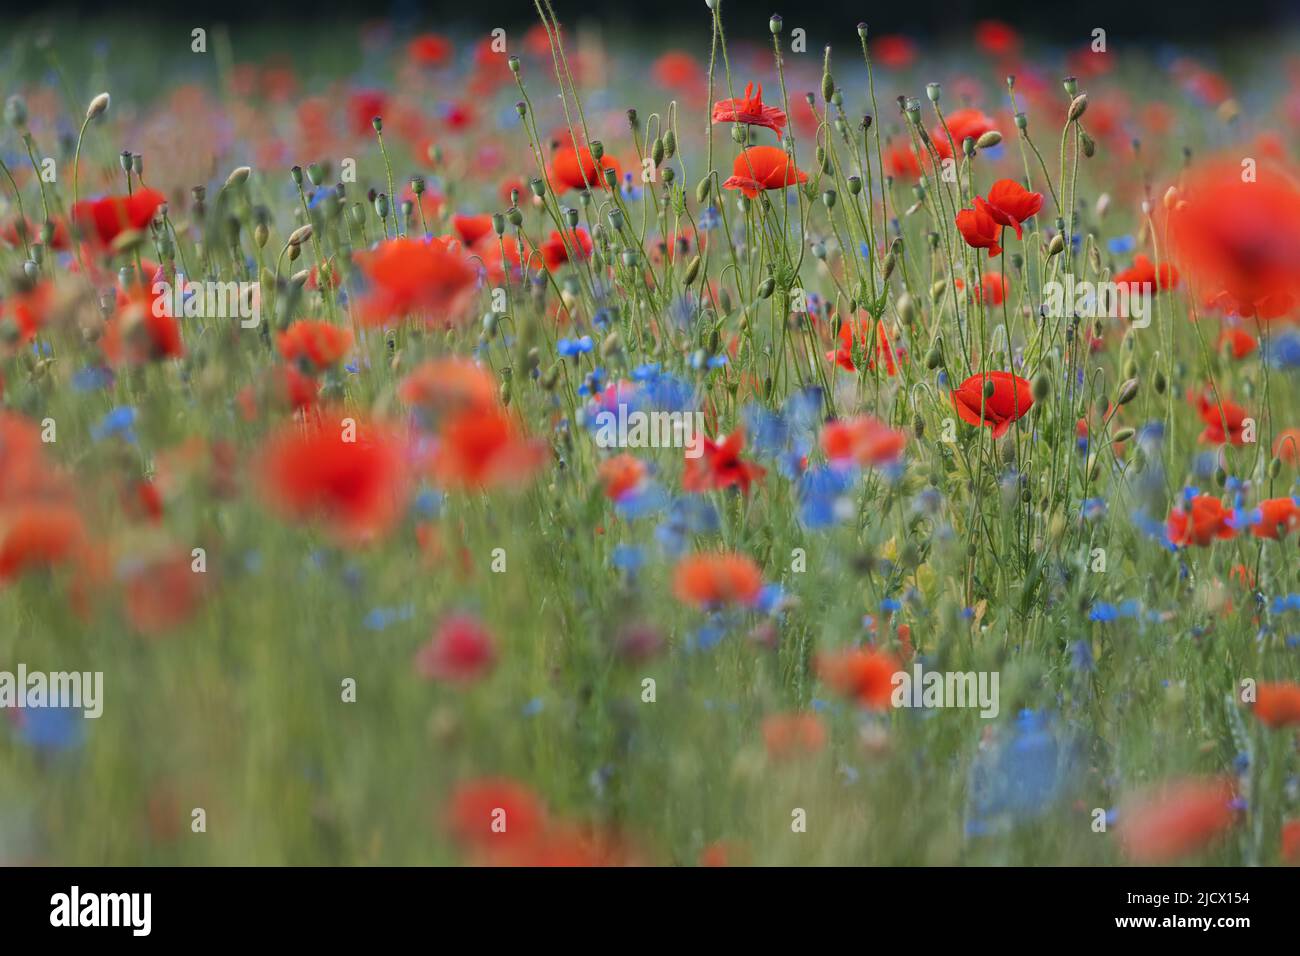 red poppies and blue cornflowers Stock Photo